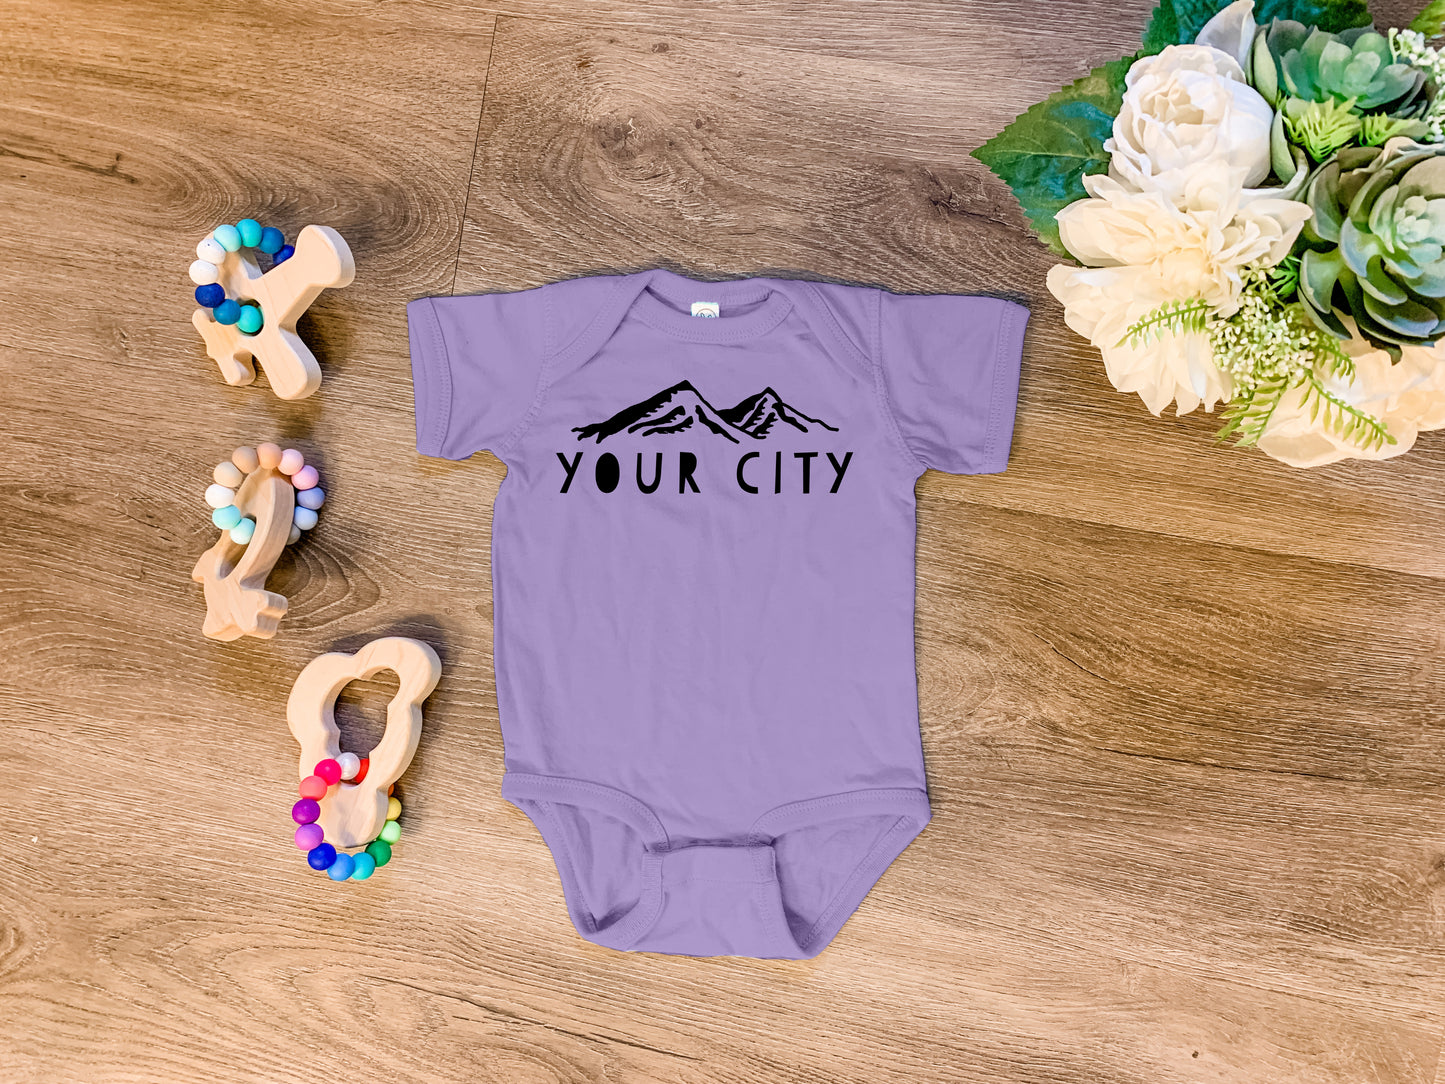 a baby bodysuit sitting on top of a wooden floor